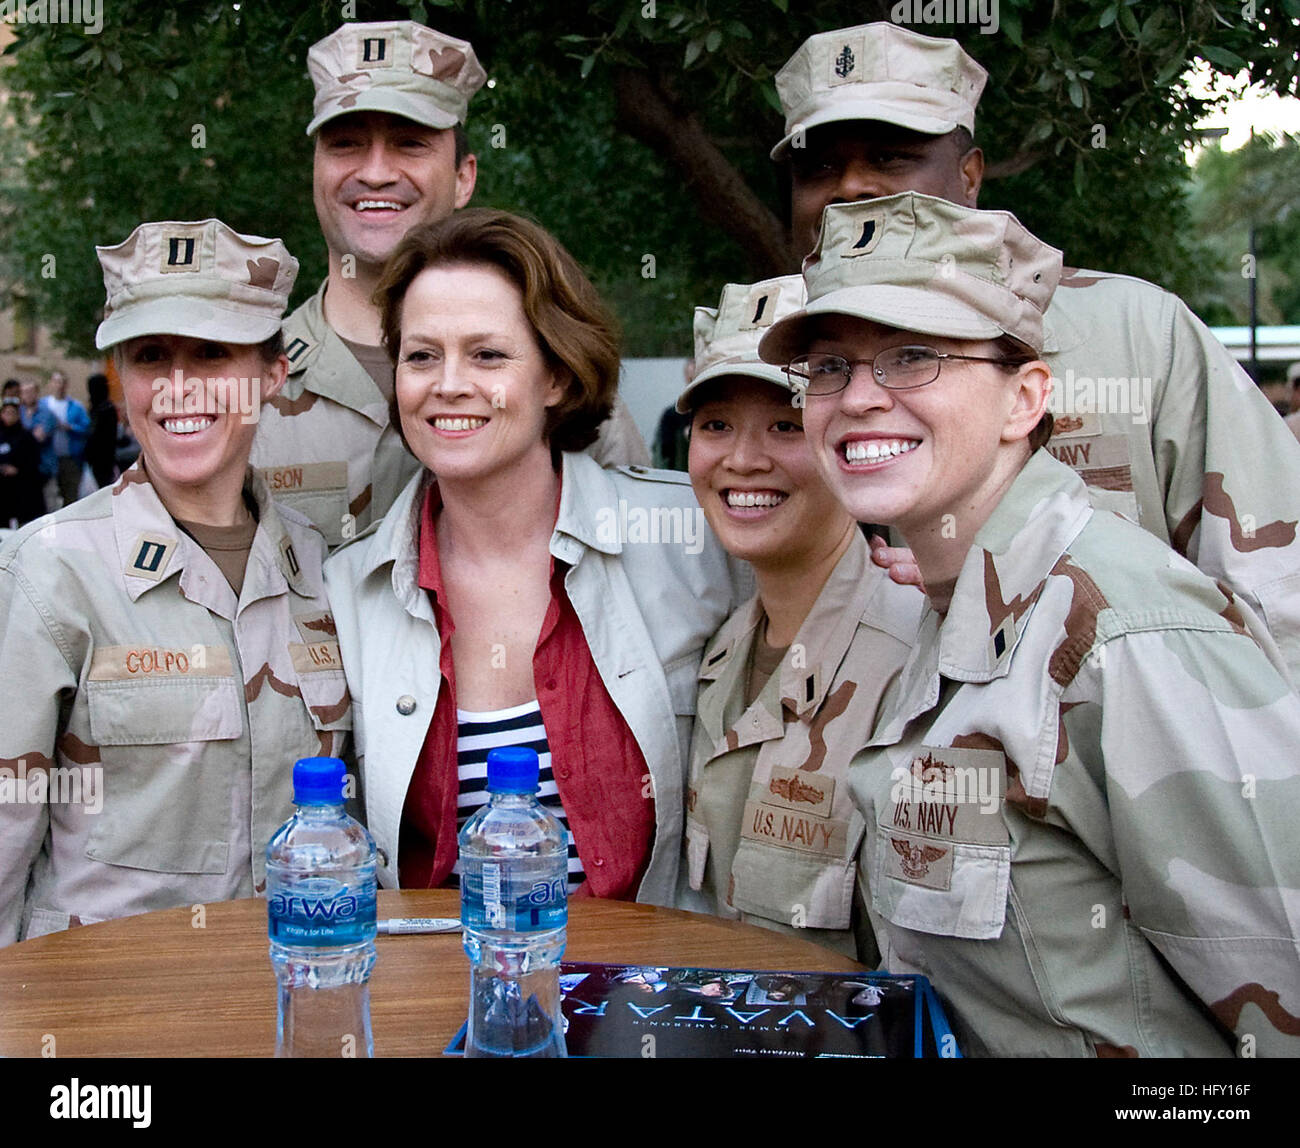 100128-N-8825R-364  MANAMA, Bahrain (Jan. 28, 2010) Actress Sigourney Weaver poses with Sailors while visiting Naval Support Activity Bahrain to help promote the movie Avatar. The Navy Entertainment-sponsored event is one of several planned in the U.S. 5th Fleet area of responsibility.  (U.S. Navy photo by Mass Communication Specialist 2nd Class Aramis X. Ramirez/Released). US Navy 100128-N-8825R-364 Actress Sigourney Weaver poses with Sailors while visiting Naval Support Activity Bahrain to help promote the movie Avatar Stock Photo